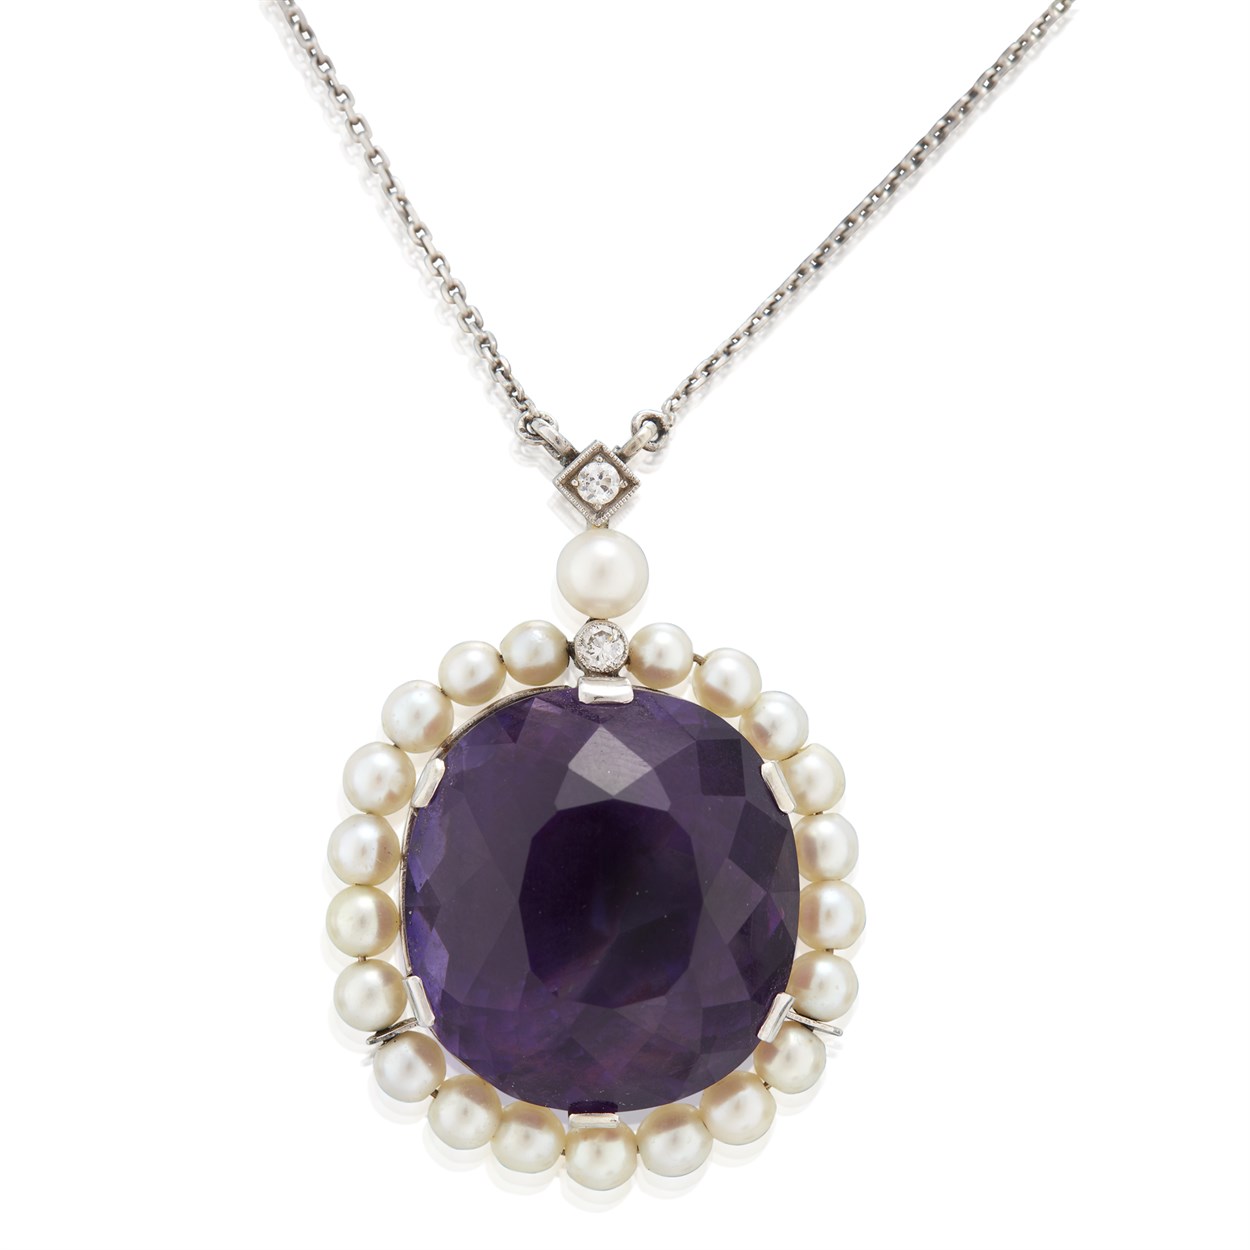 Lot 34 - An amethyst and cultured pearl suite